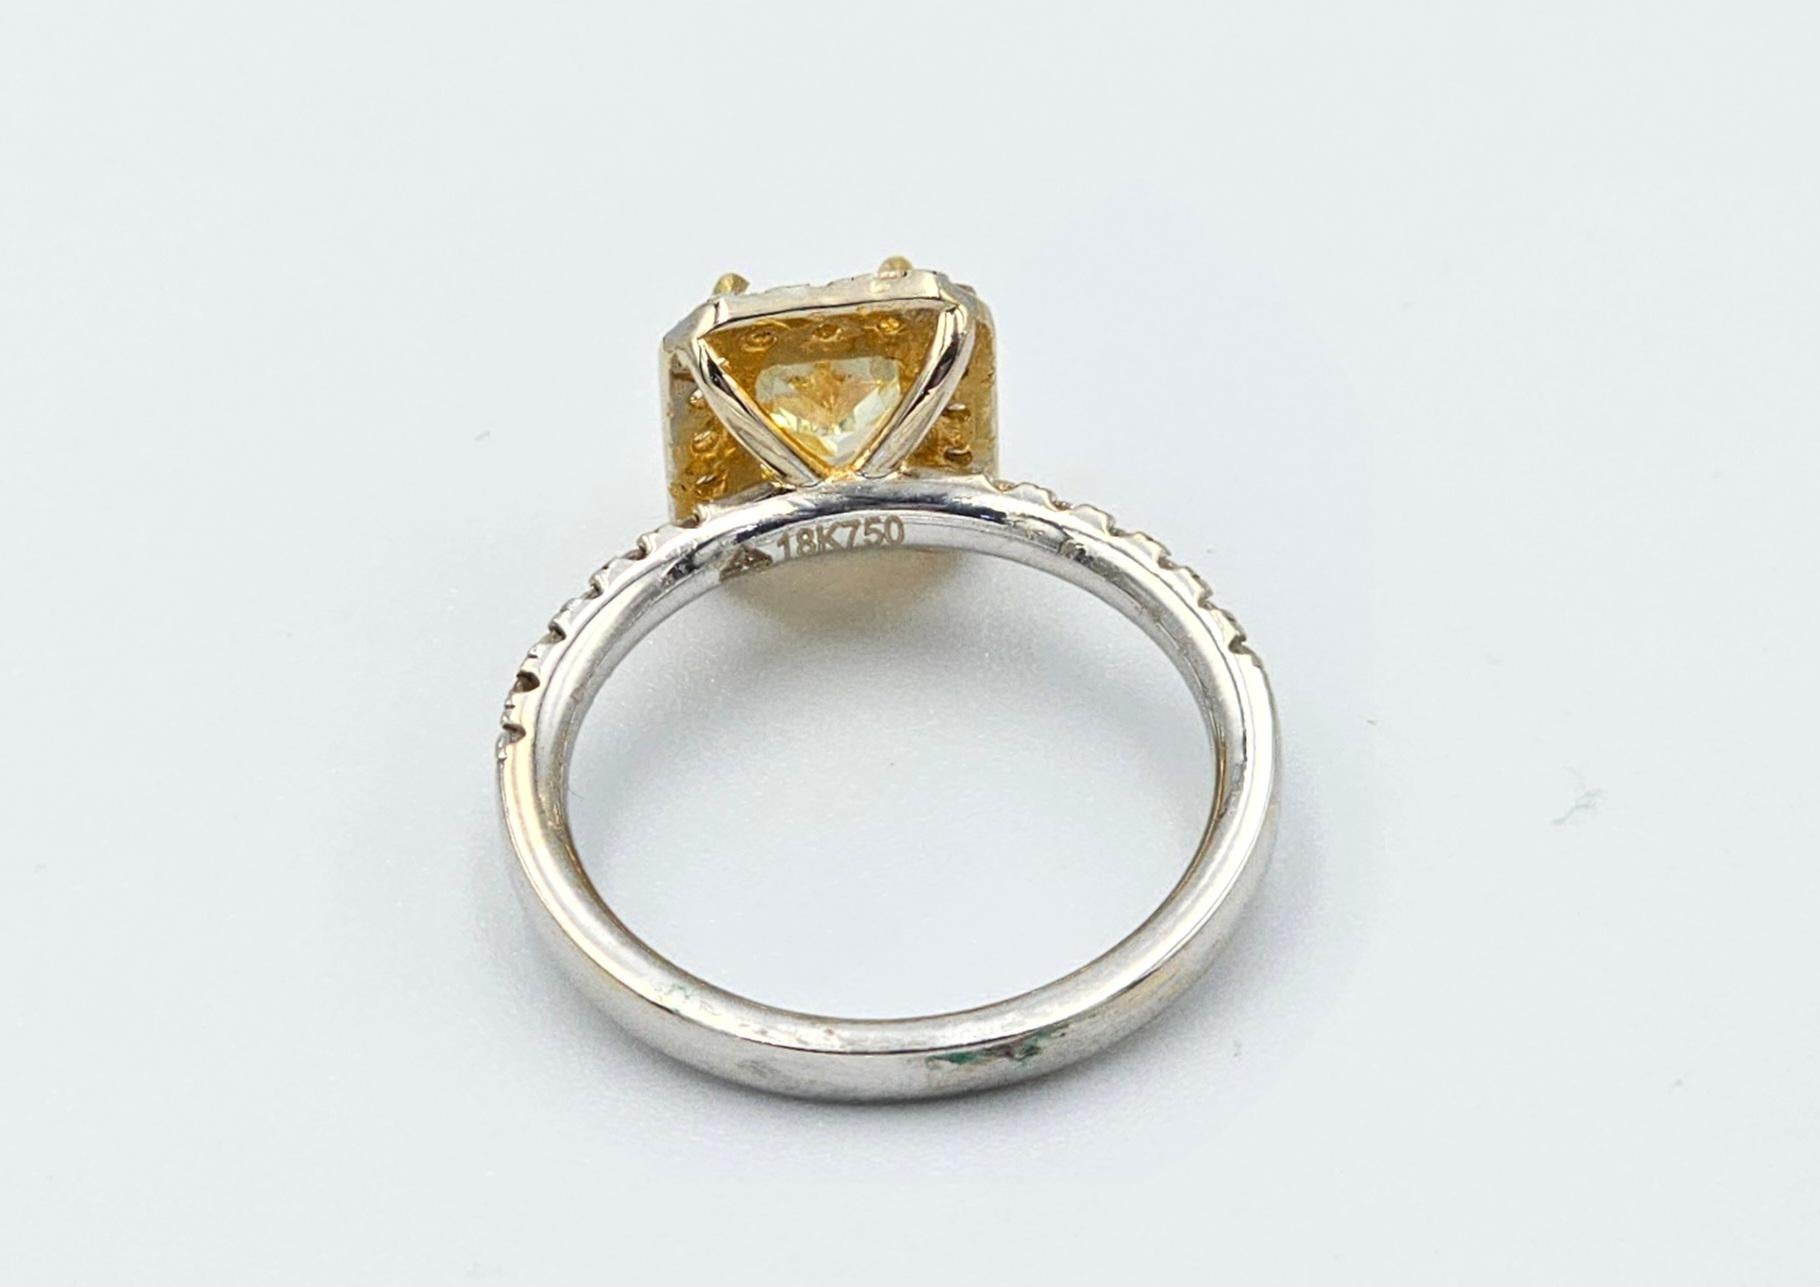 This is a beautiful GIA certified Fancy Yellow Diamond Ring with diamonds and 18k gold. It is a beautiful and amazing piece with vivid color, set in a custom designed ring to enhance its natural beauty!
Fancy Yellow Diamond : 1.14